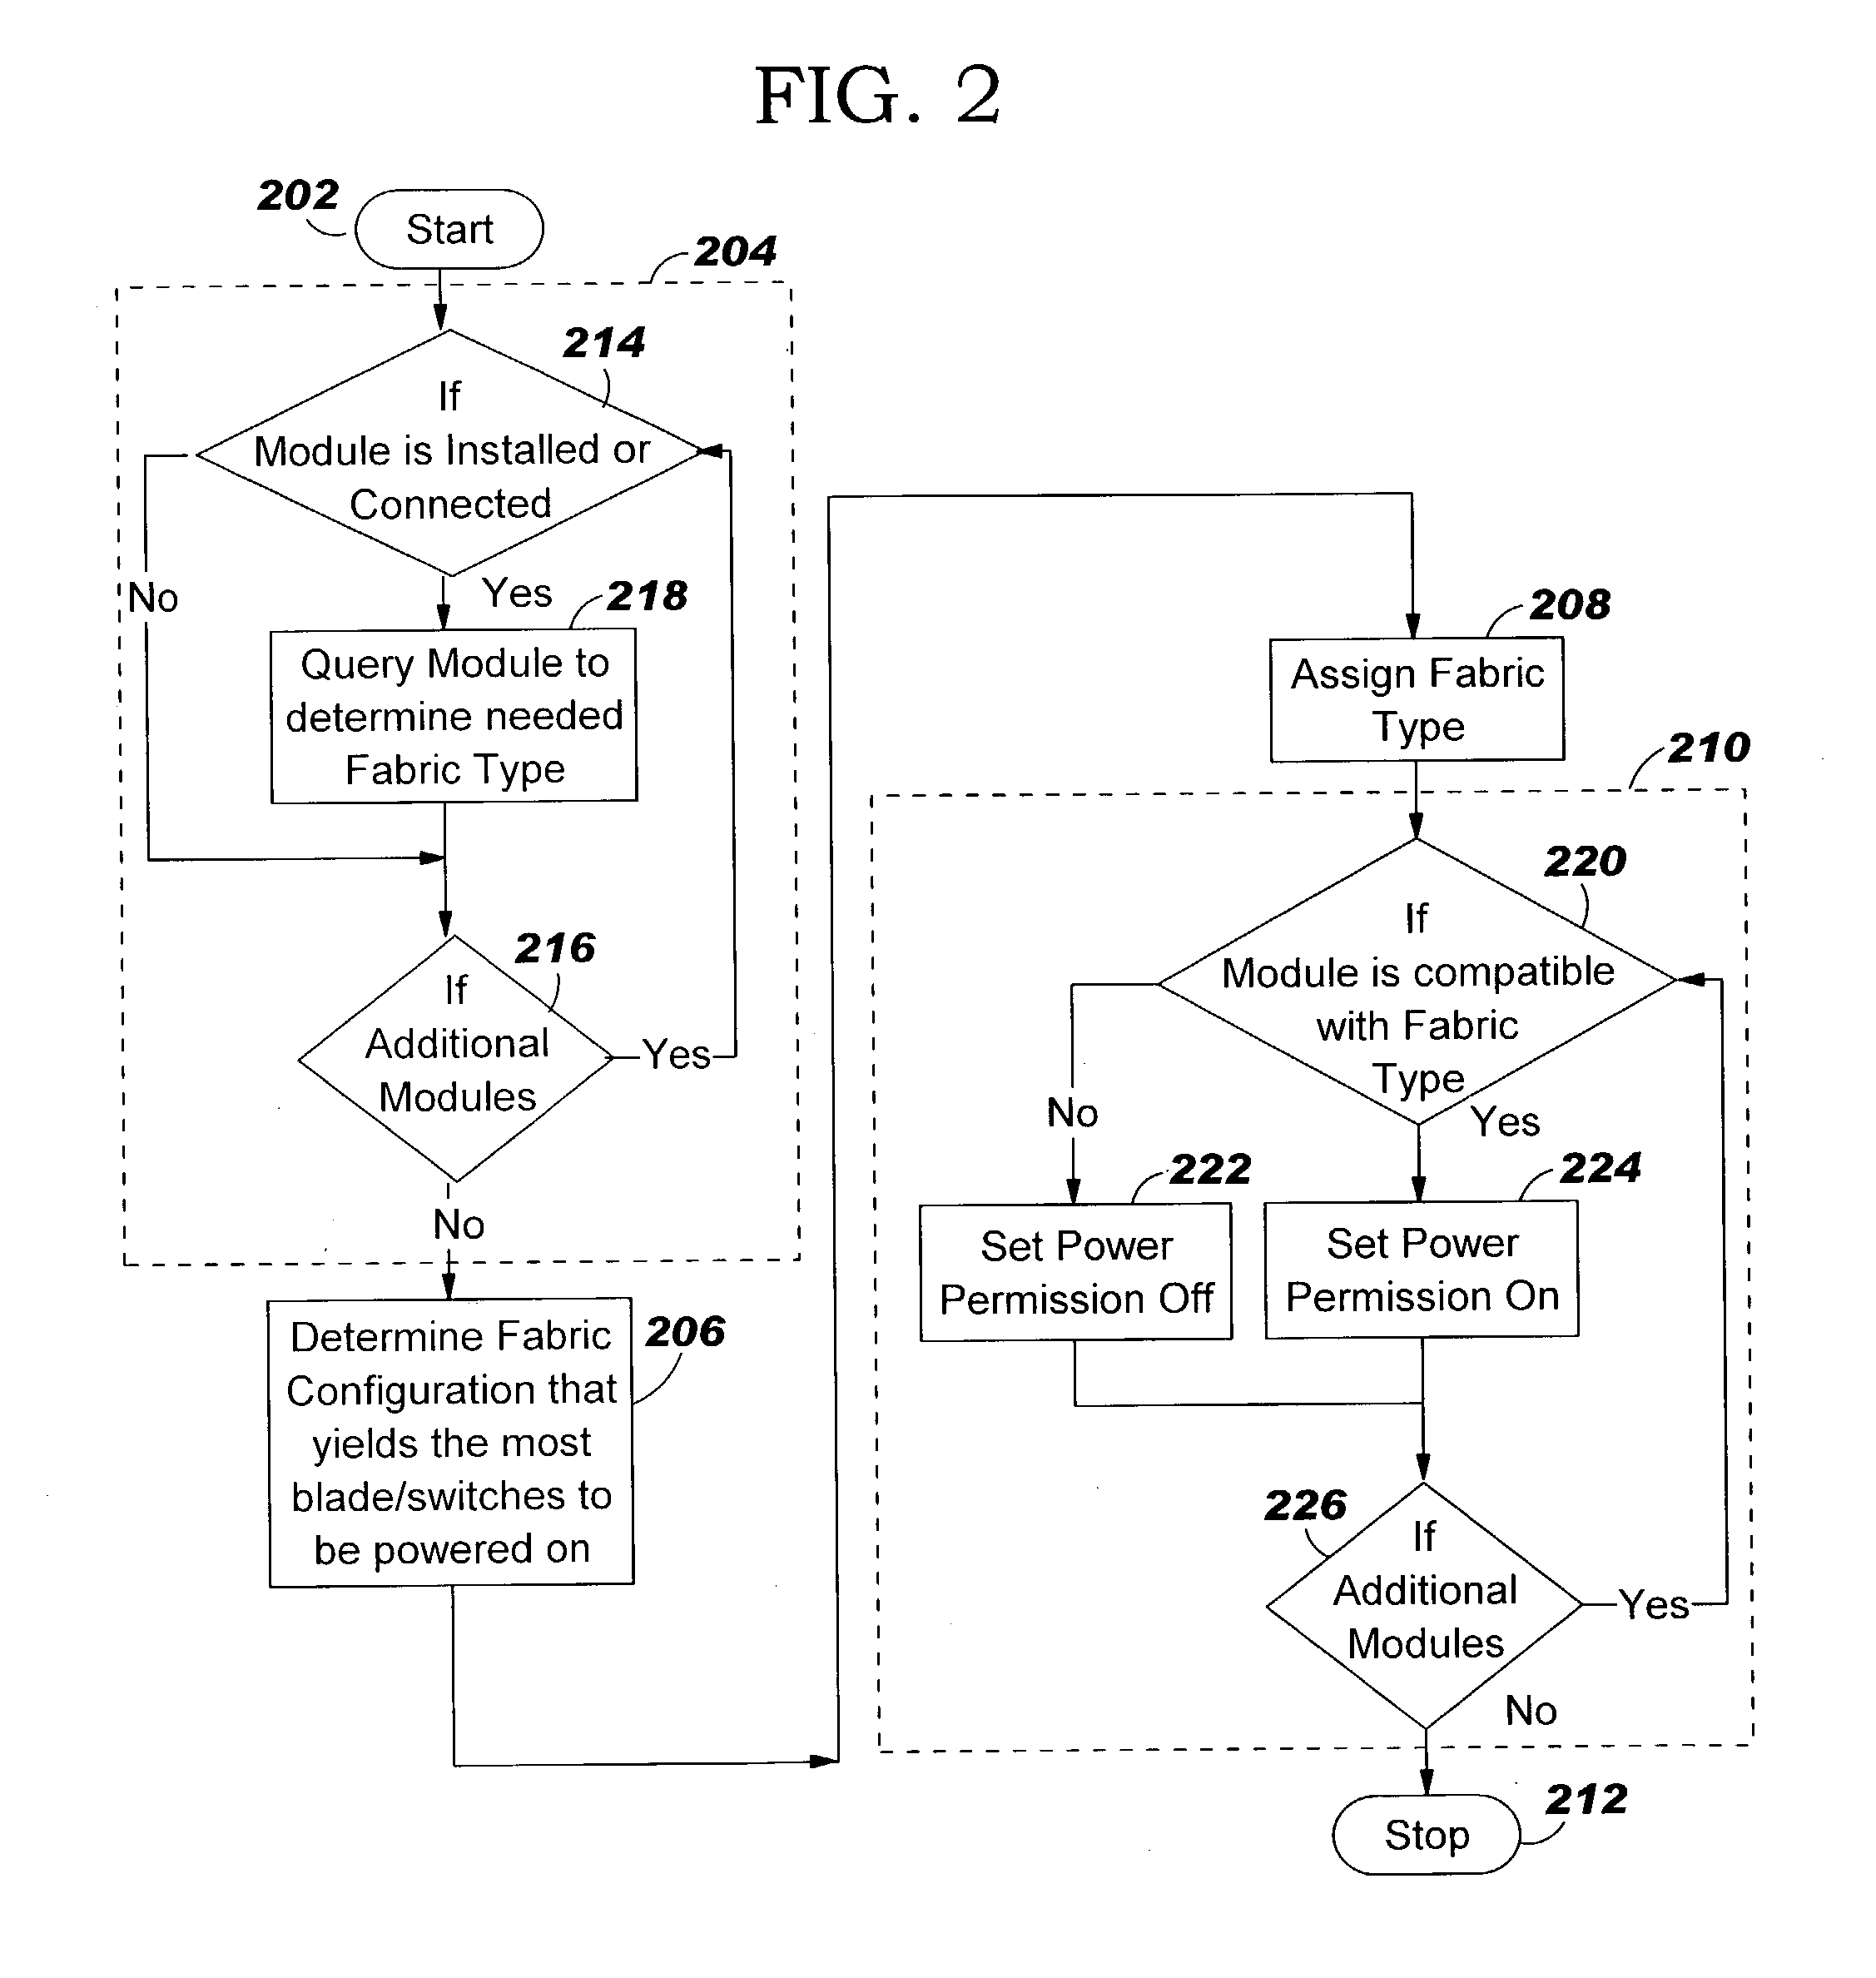 Apparatus, method and program product for automatically distributing power to modules within a server